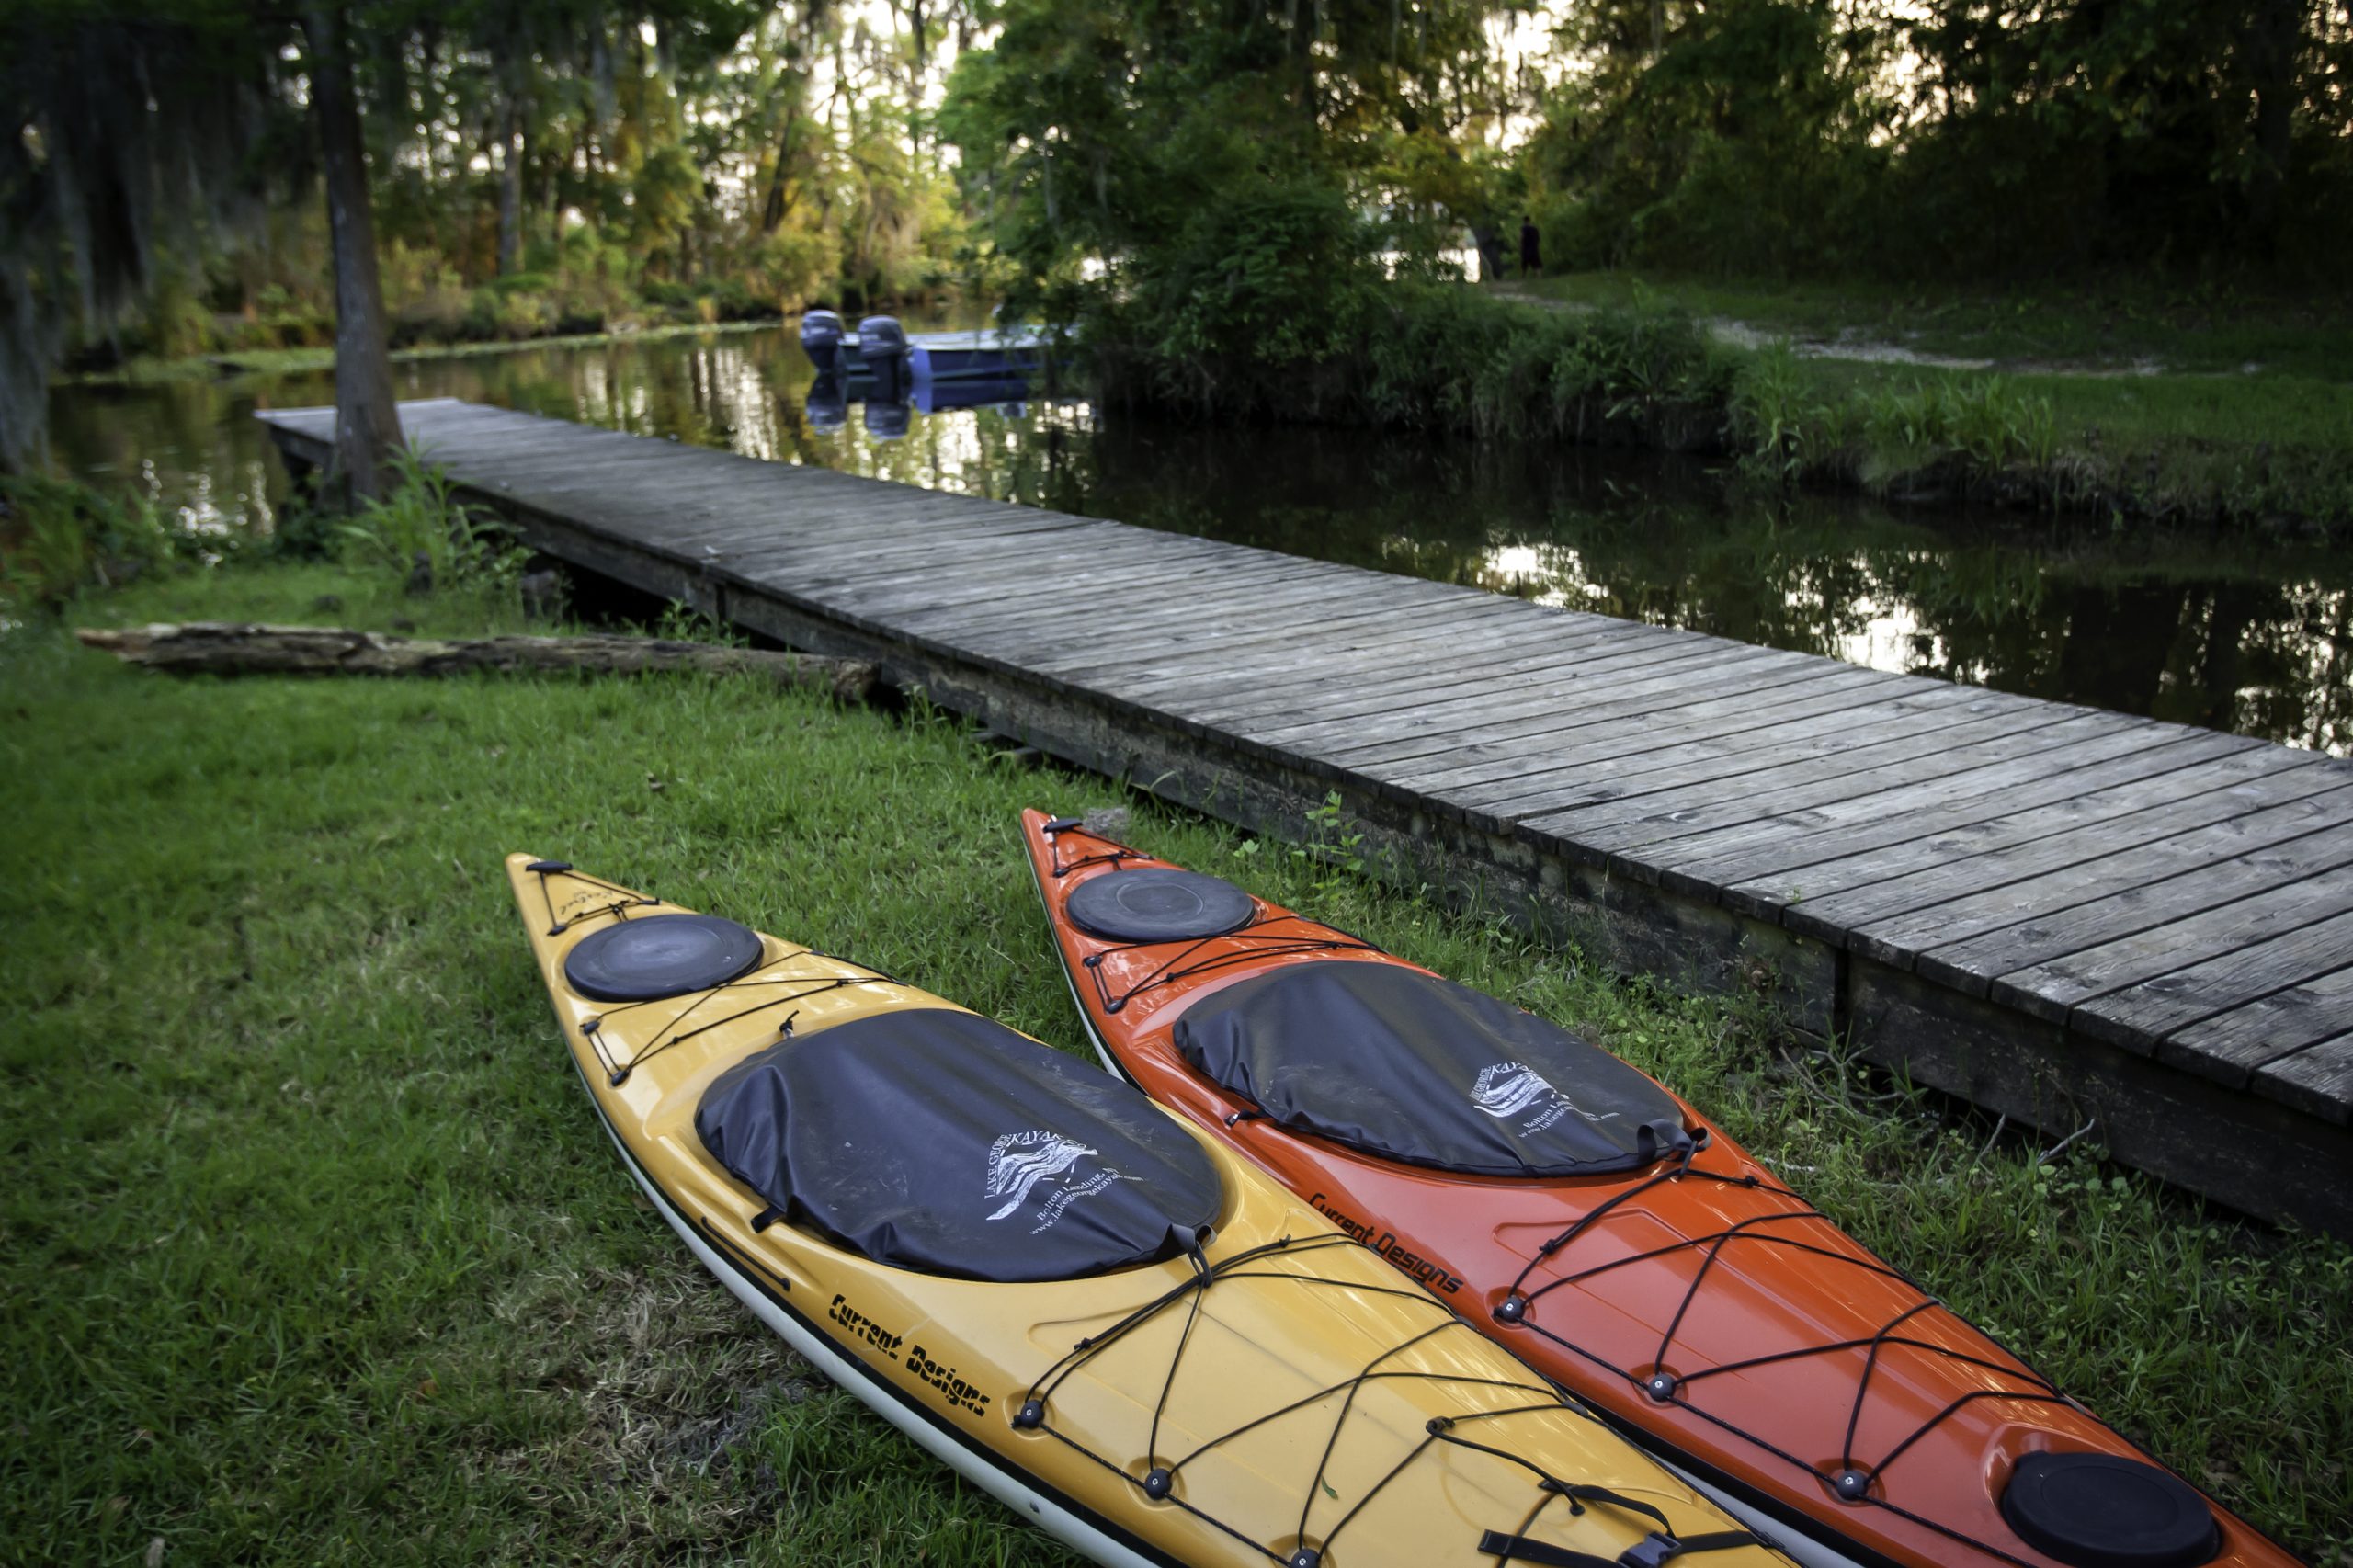 Kayaks rest near a pier and the boat slips at Louisiana's Fairview-Riverside State P ark located near Madisonville, La. and along the Tchefuncte River in St. Tammany Parish.